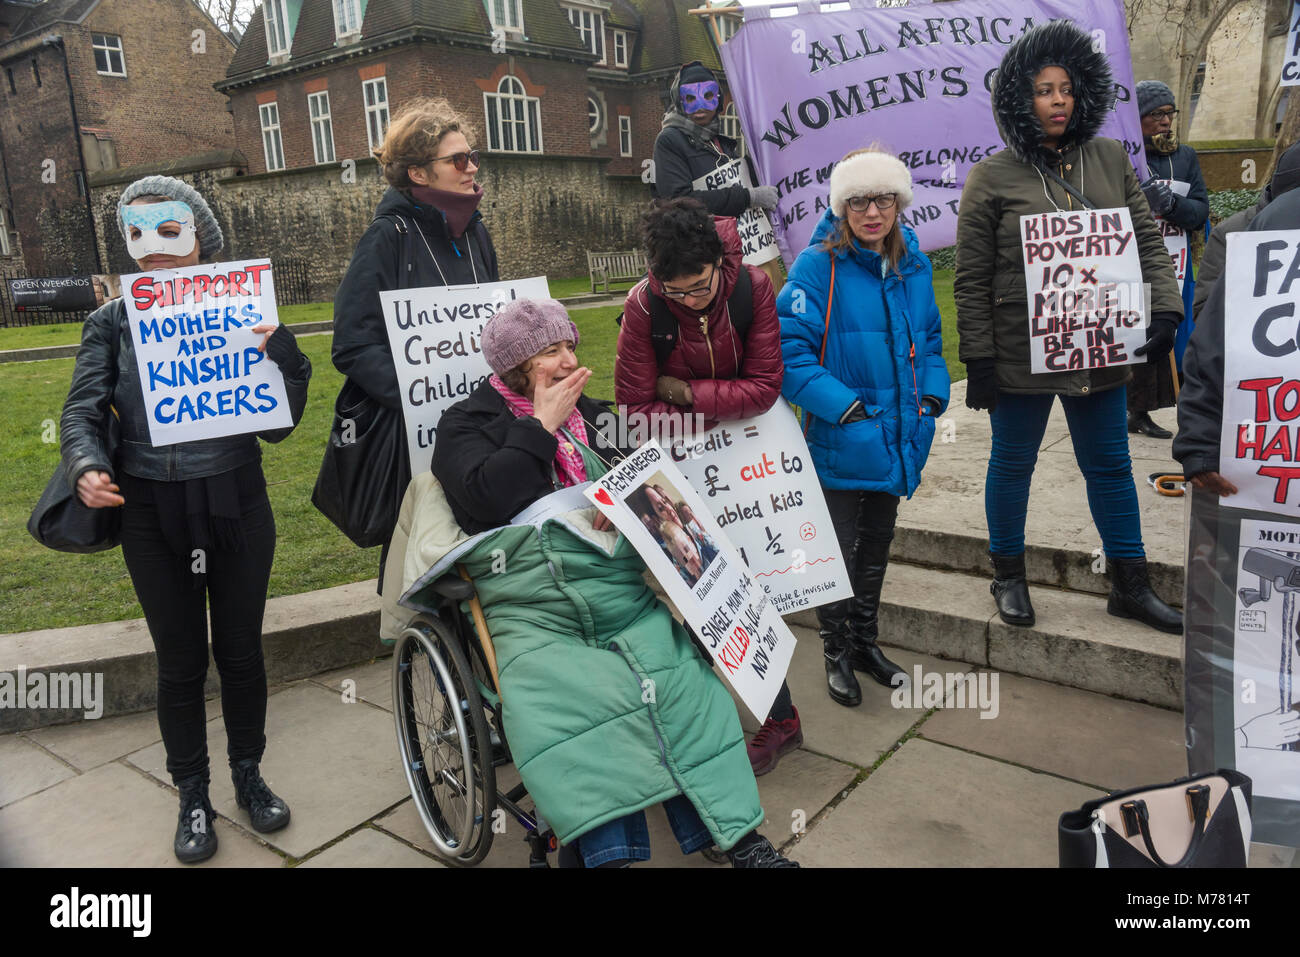 London, UK. 8th March 2018. Global Women's Strike mock trial of the Family Courts in an International Women’s Day protest in front of Parliament. Speakers included mothers who have had children unjustly removed and others who read out shocking comments made in court by judges. The UK has the highest rate of adoptions in Europe, almost all without consent of their birth family. ey say that poverty, often a result of bebefit cuts Credit: Peter Marshall/Alamy Live News Stock Photo